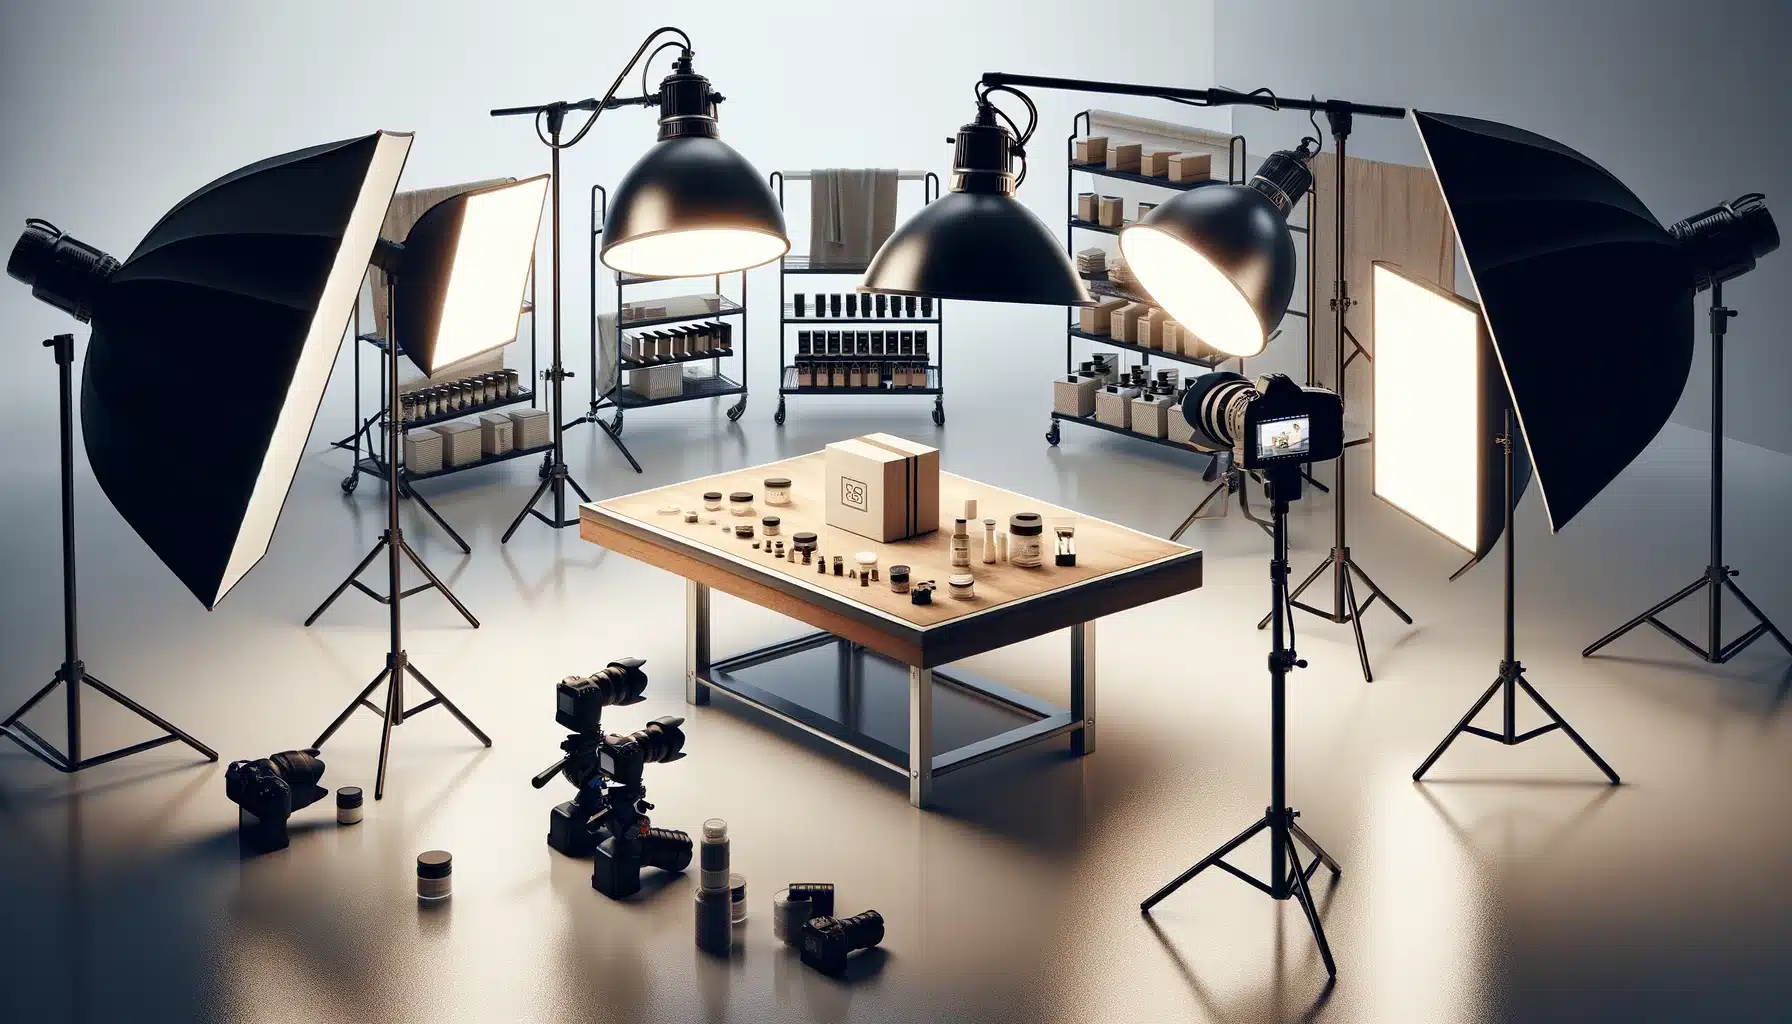 Professional product photography setup with multiple studio lights and a small product on a central table in a modern studio